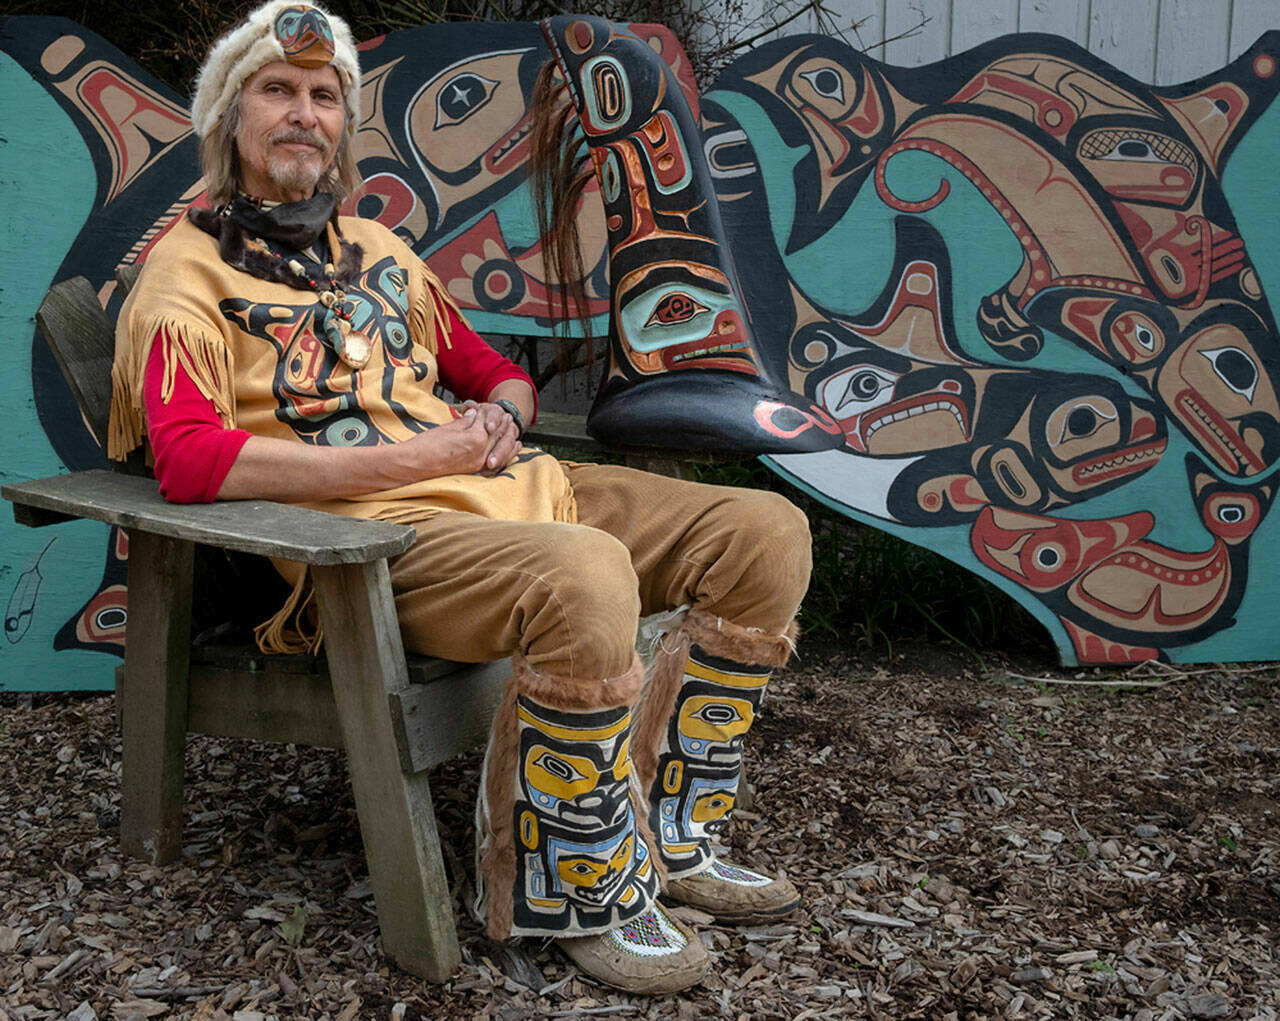 Terry Donnelly Photo
Tlingit artist and educator Odin Lonning will teach a course on the language of Indigenous design at Dig Deep Gardens.